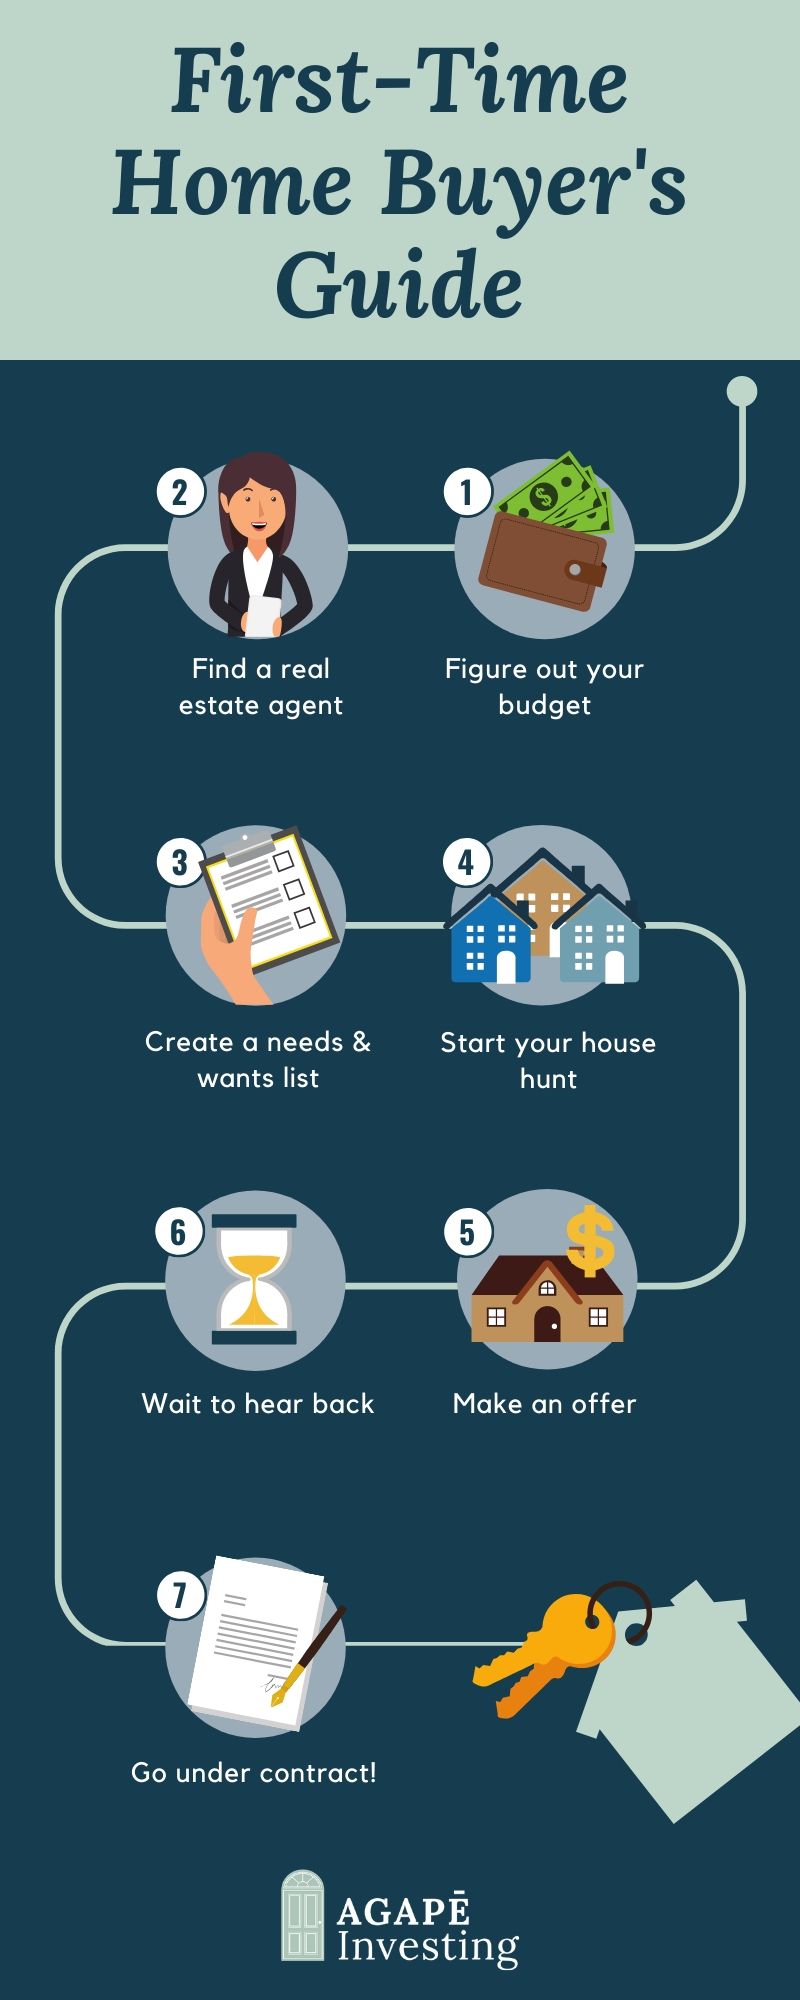 https://agapeinvests.com/wp-content/uploads/2020/01/First-Time-Home-Buyers-Guide-1.jpg